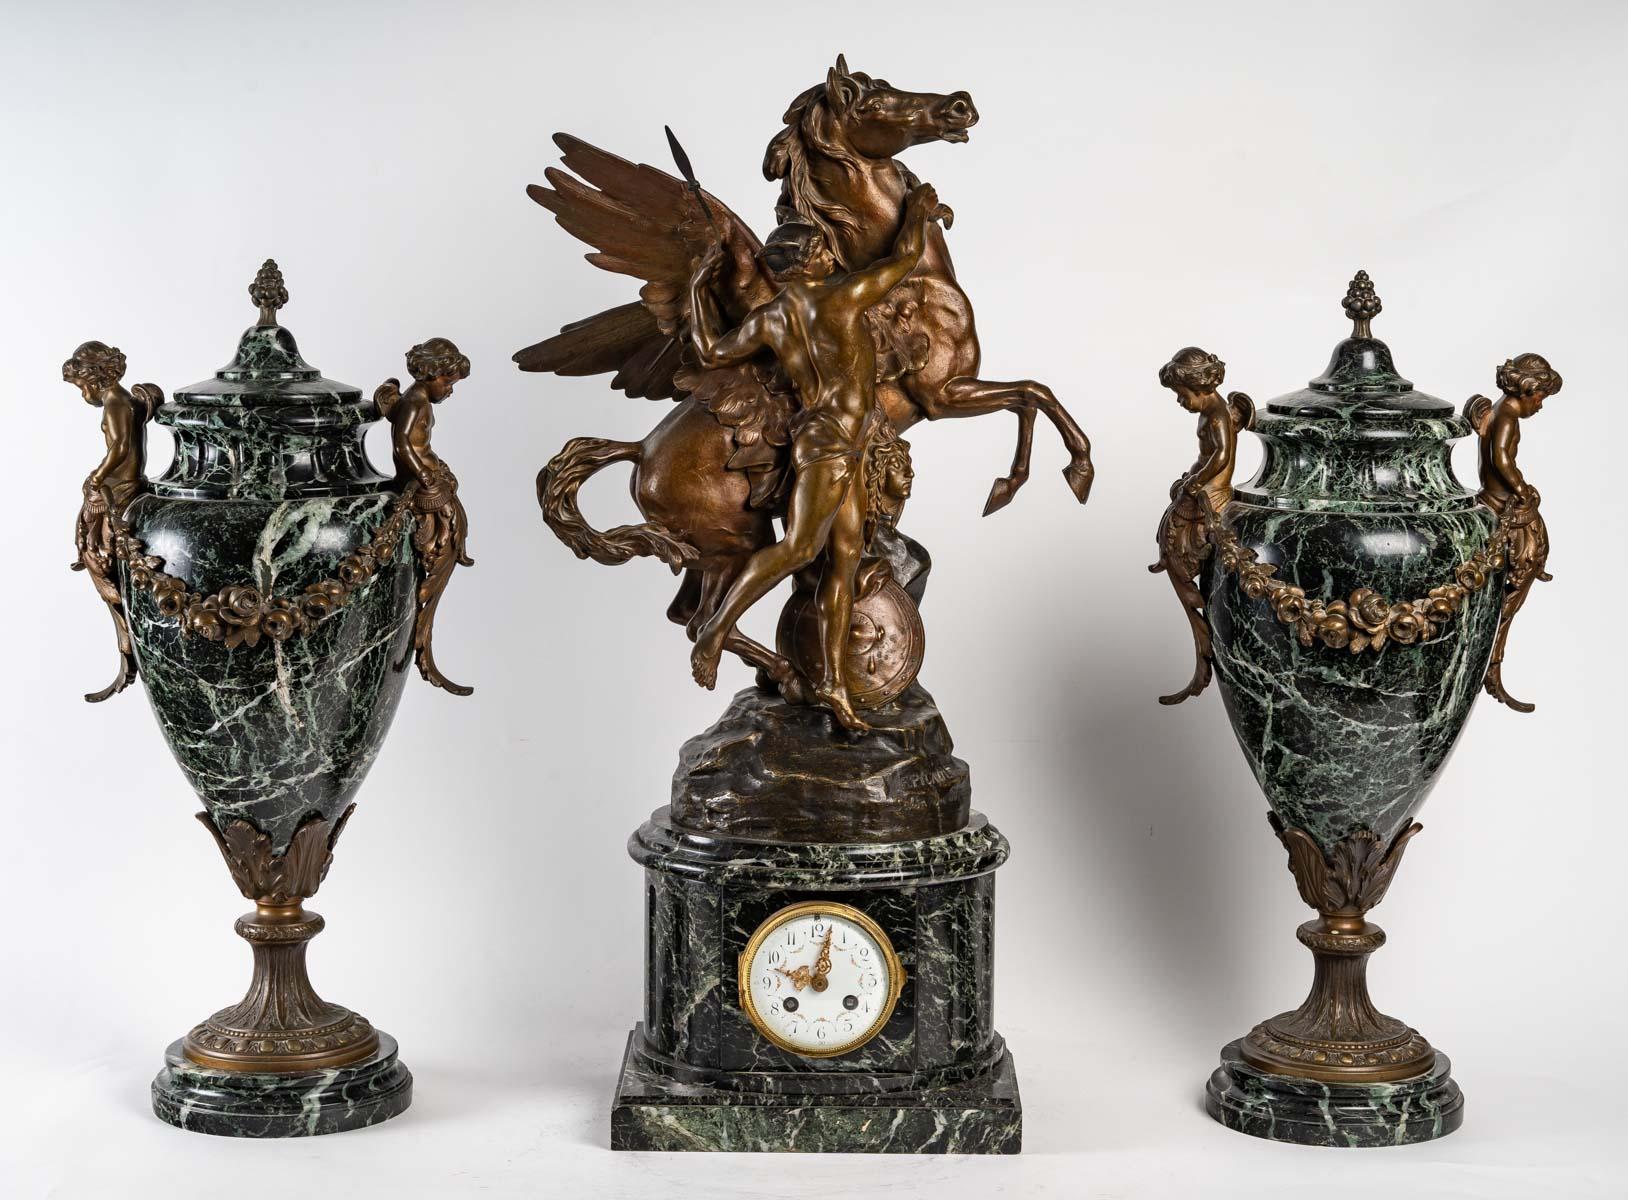 Mantelpiece in regule, sea green marble, two cassolettes and a clock by Emile Picault (1833-1922).

Clock - H: 70 cm, W: 41 cm, D: 20 cm Mantelpiece in regule.